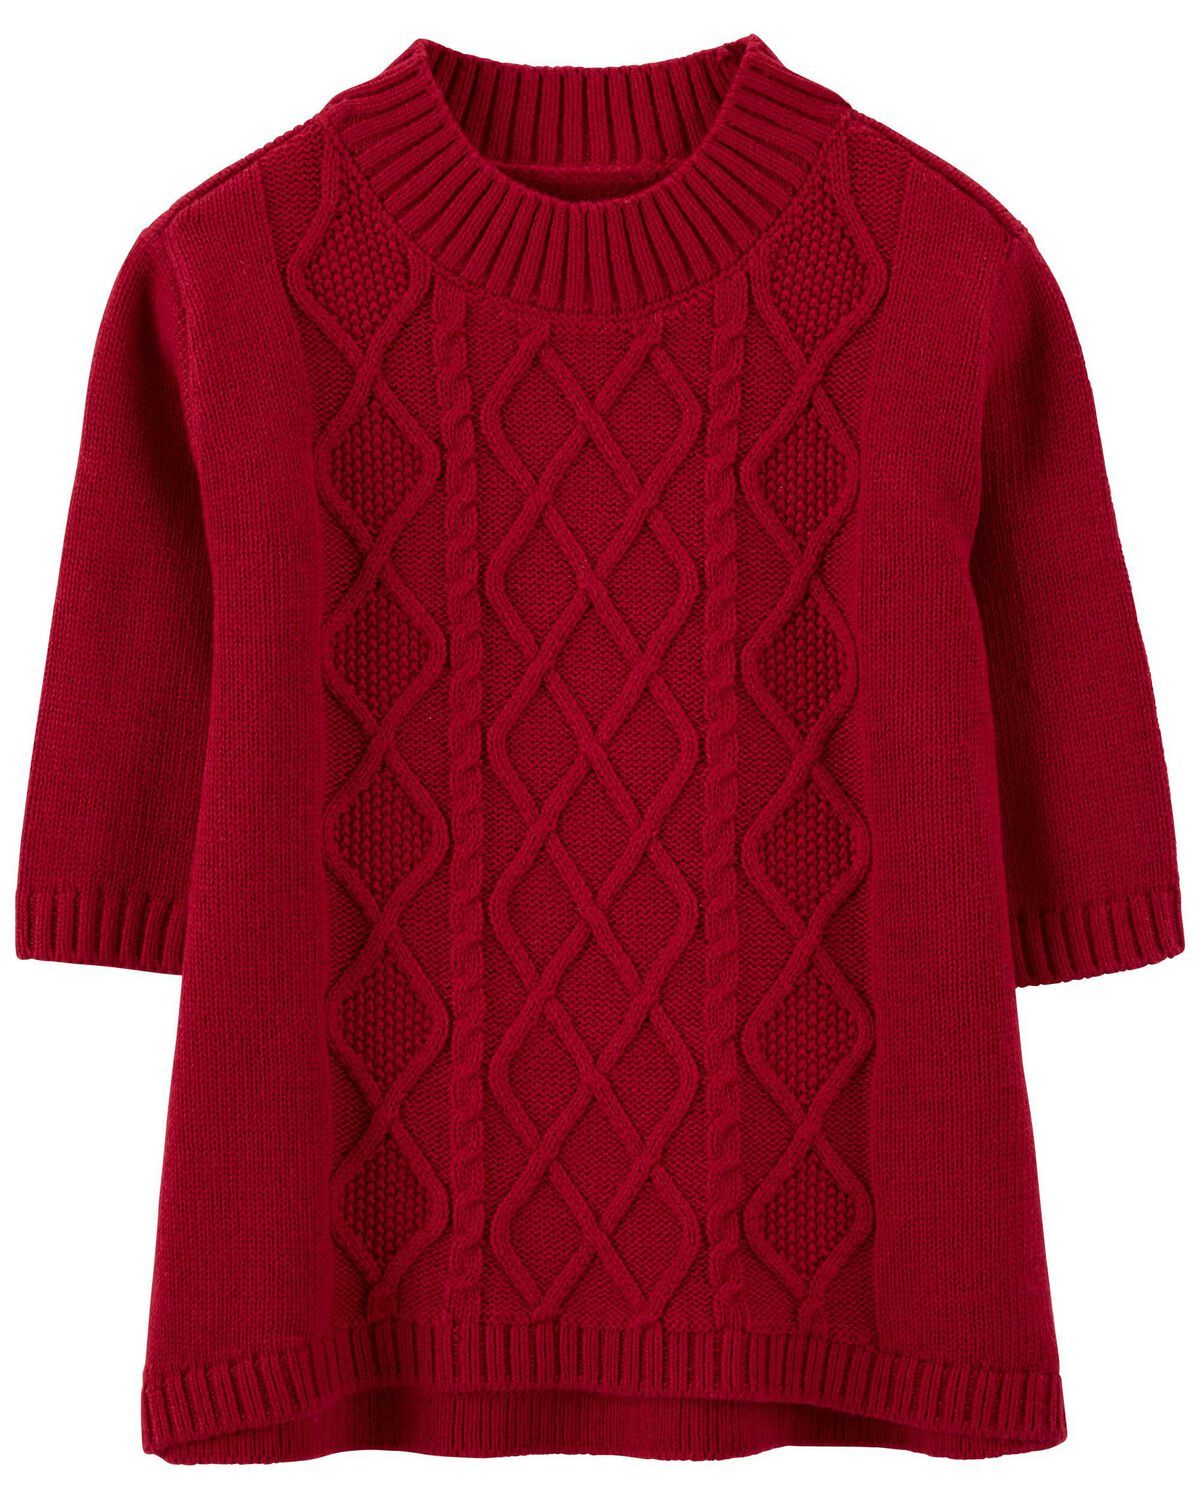 Red Baby Cable Knit Sweater Dress | carters.com | Carter's